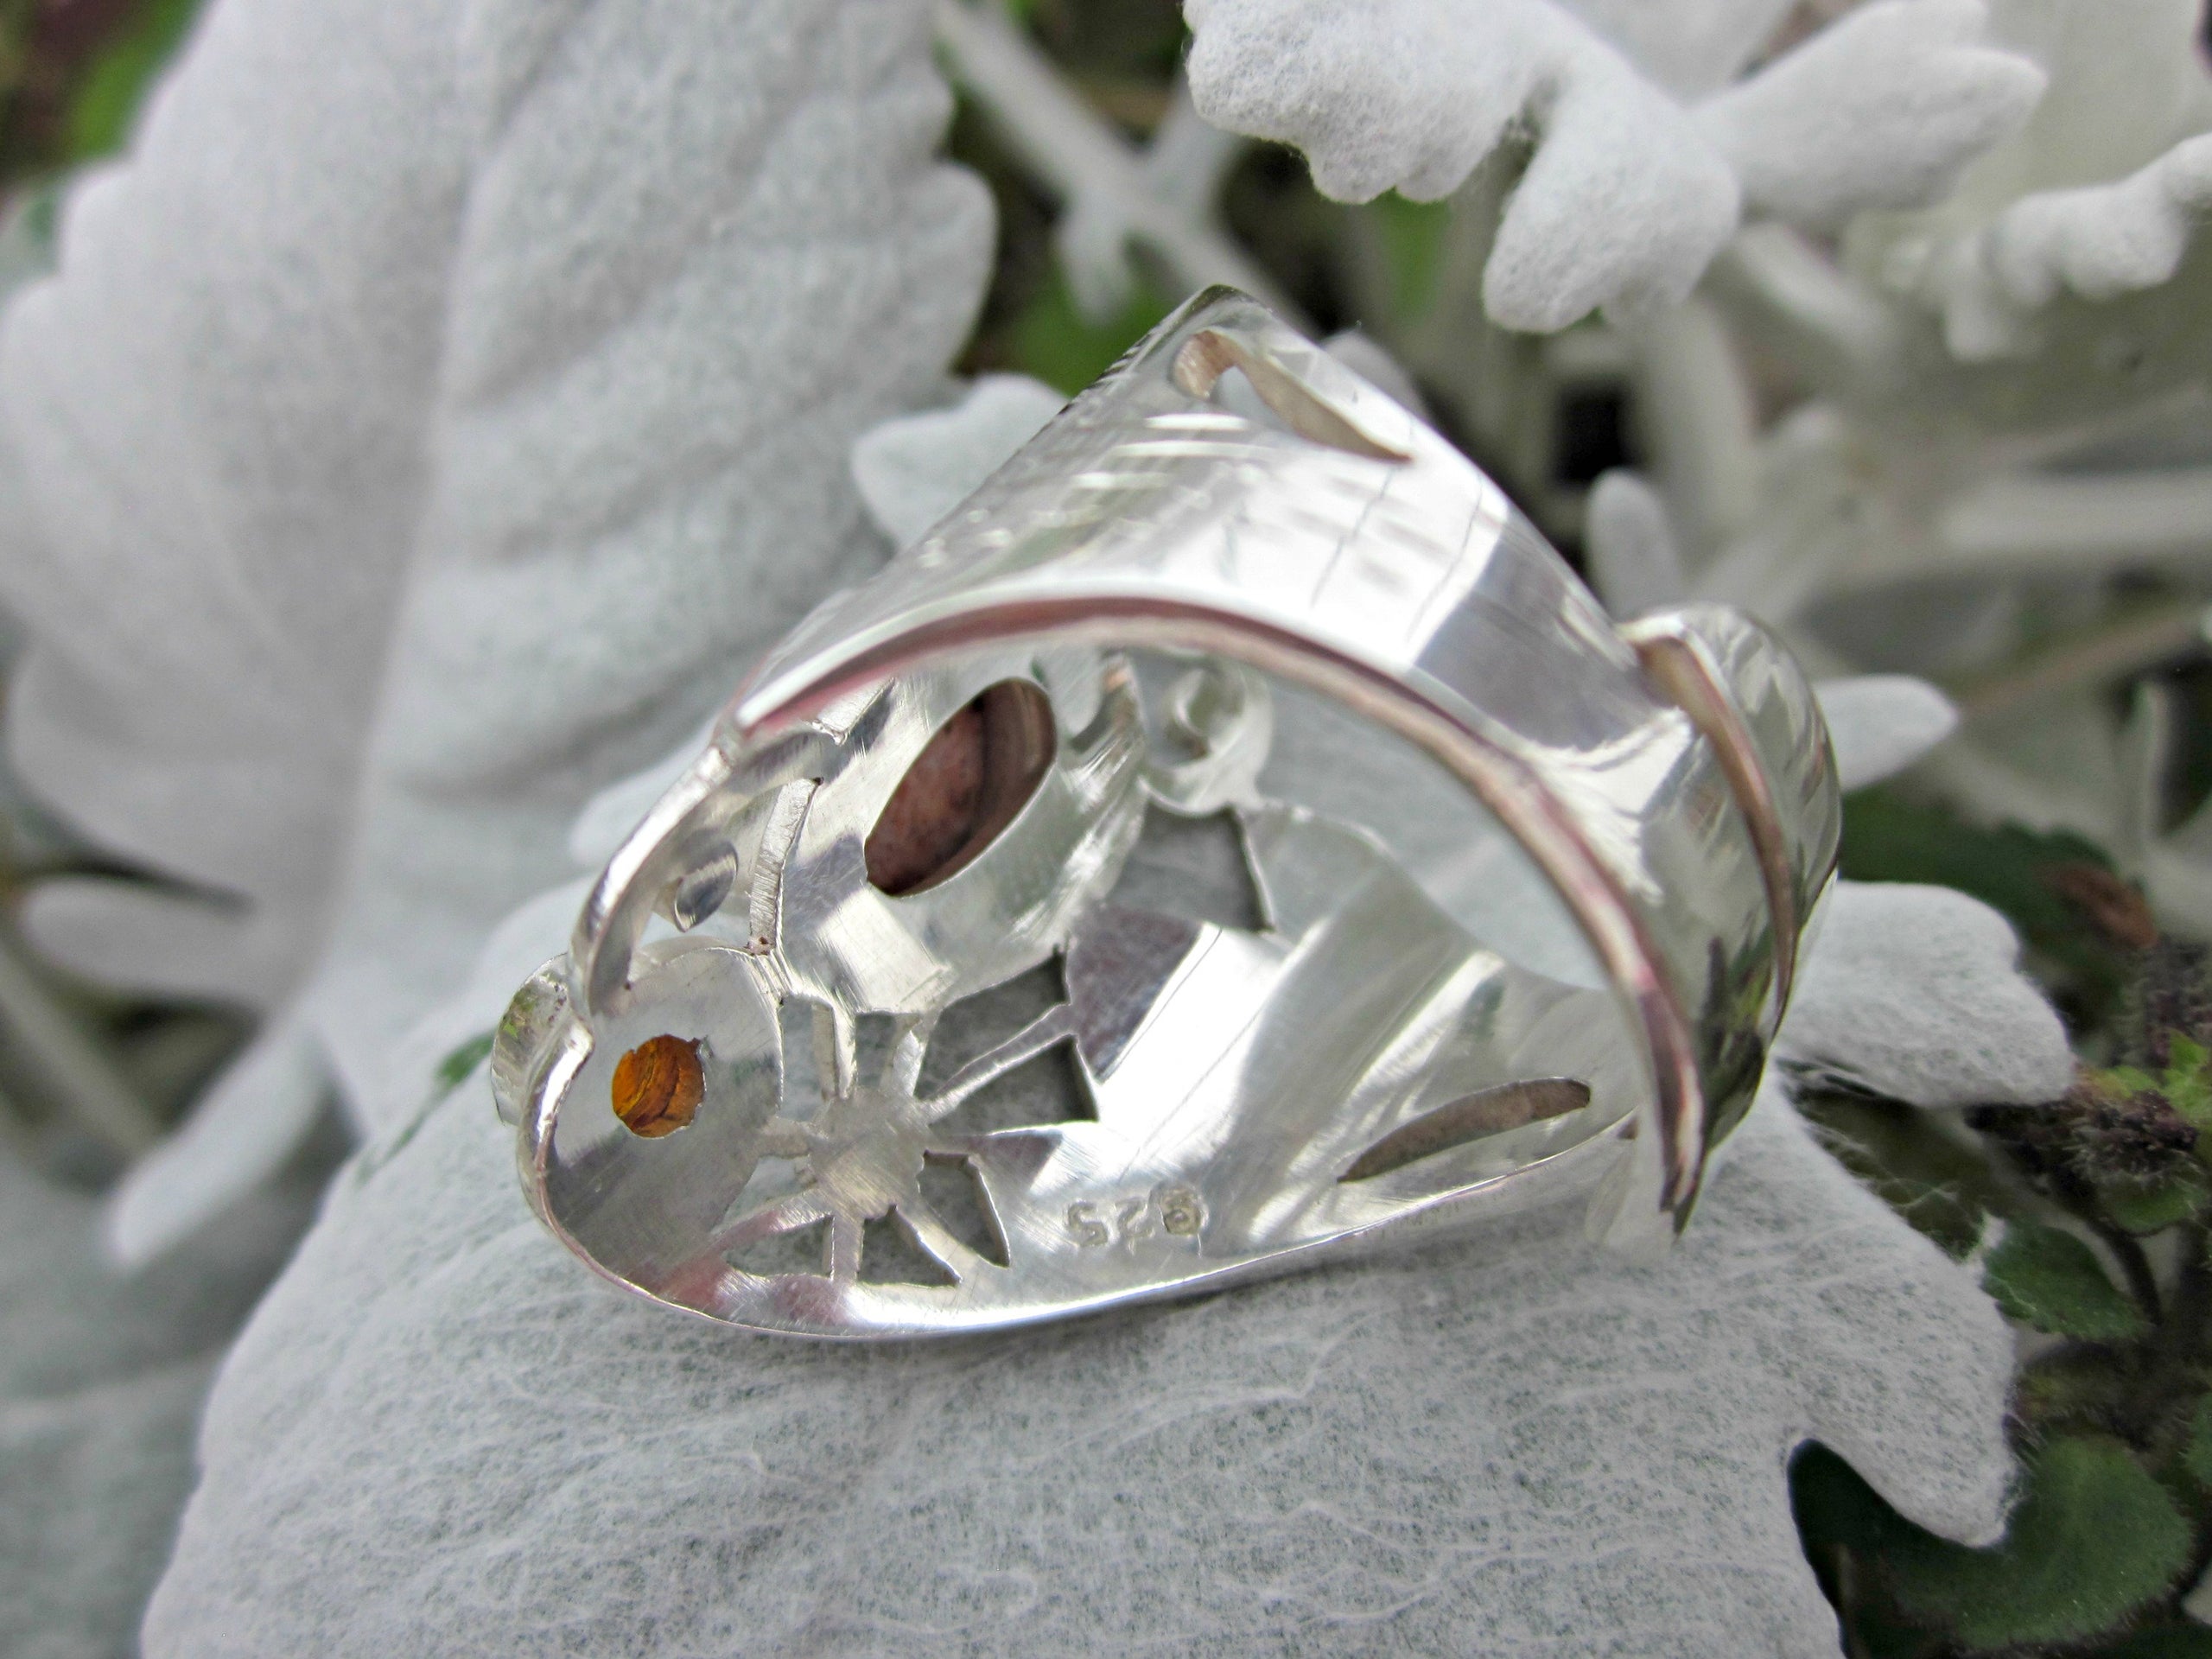 Rhodium #2607e Mexican Fire FIRE OPAL Ring 925 STERLING SILVER Size 8